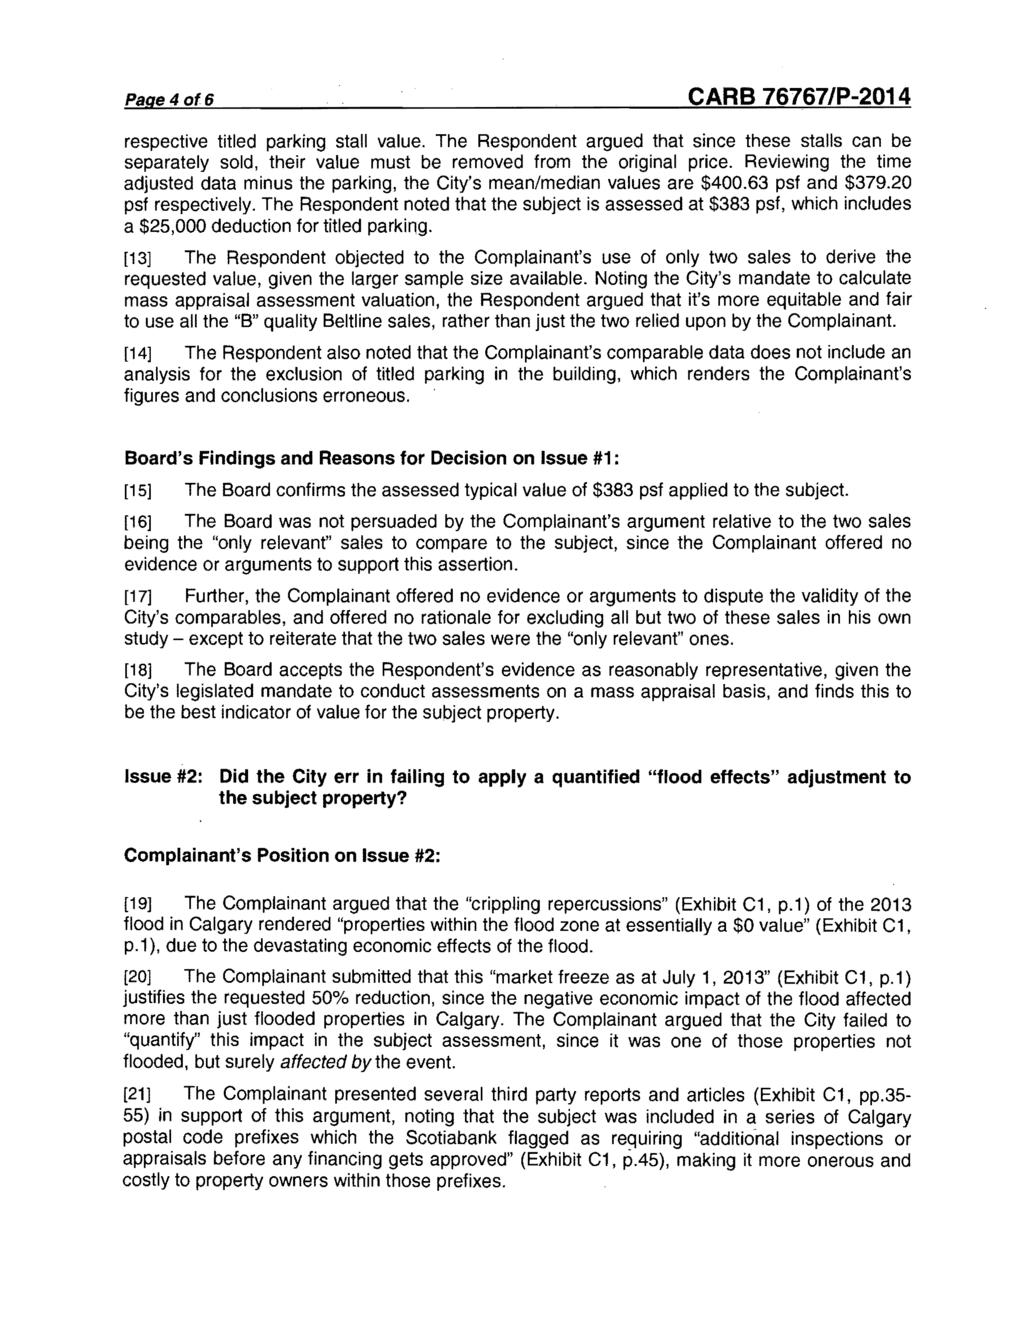 Page4 of6 respective titled parking stall value. The Respondent argued that since these stalls can be separately sold, their value must be removed from the original price.